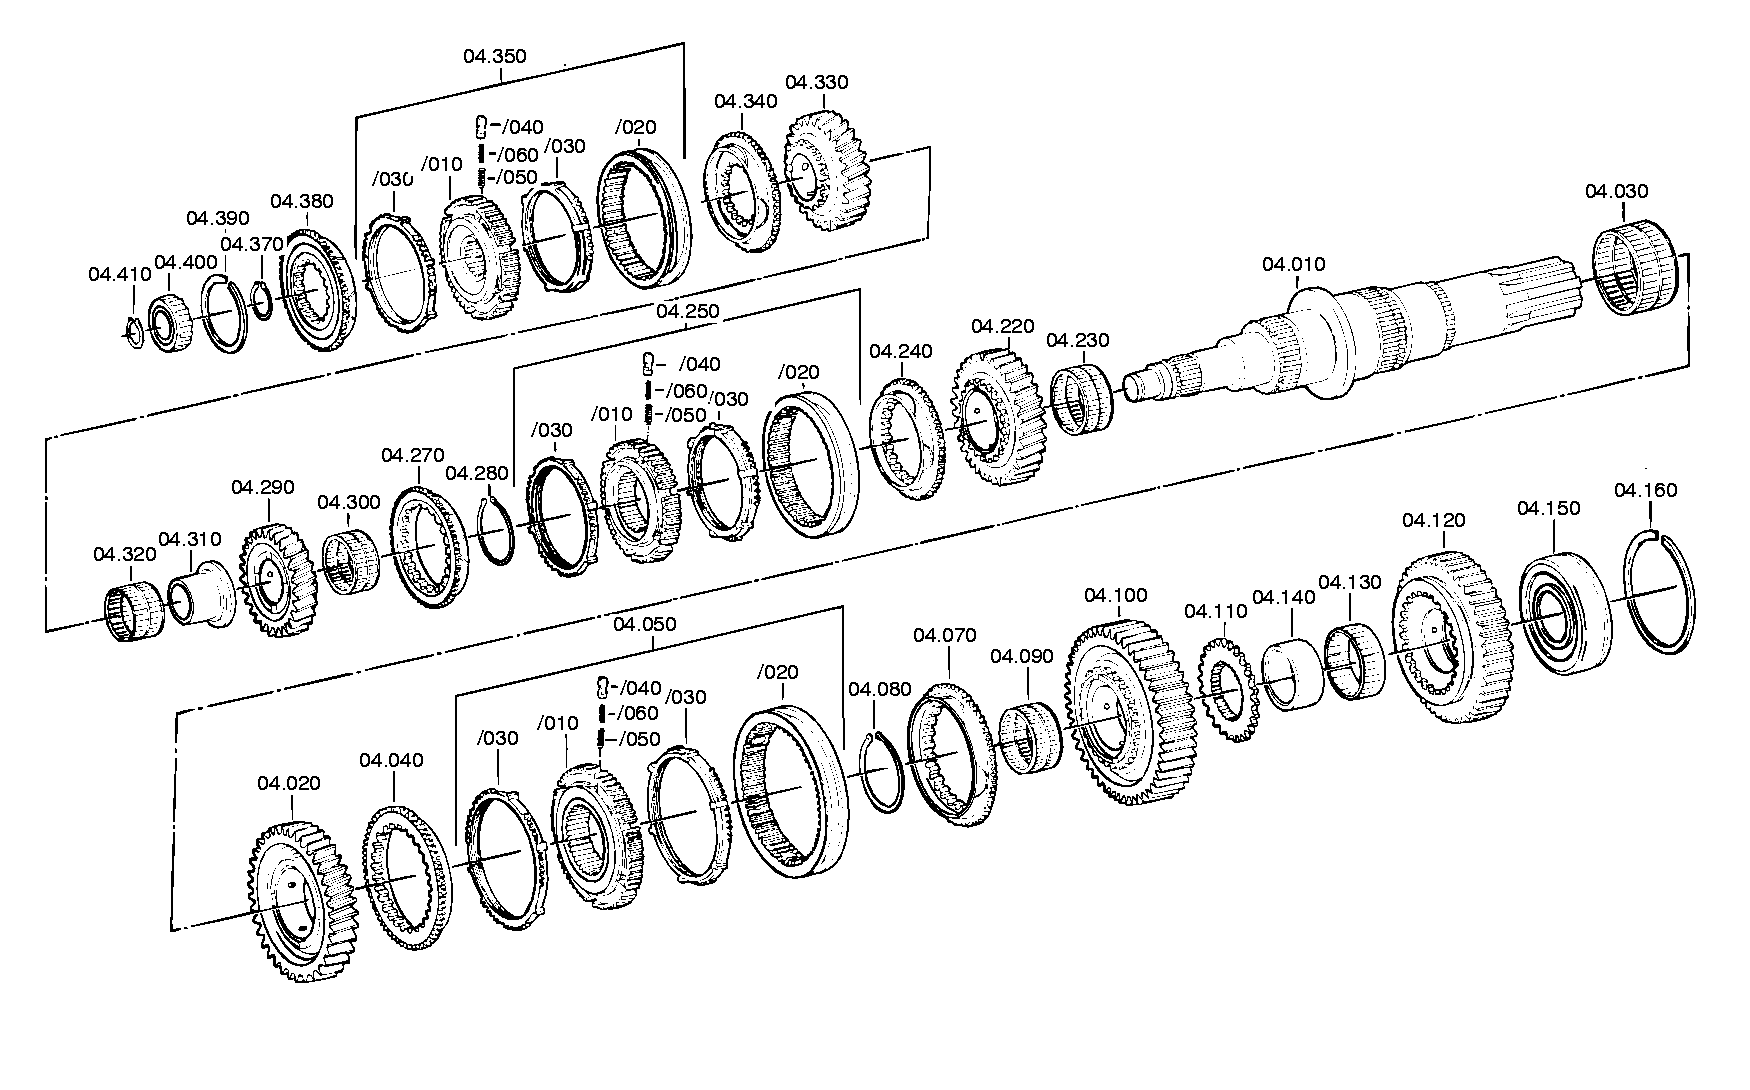 drawing for TERBERG BENSCHOP B.V. A0139819010 - NEEDLE CAGE (figure 1)